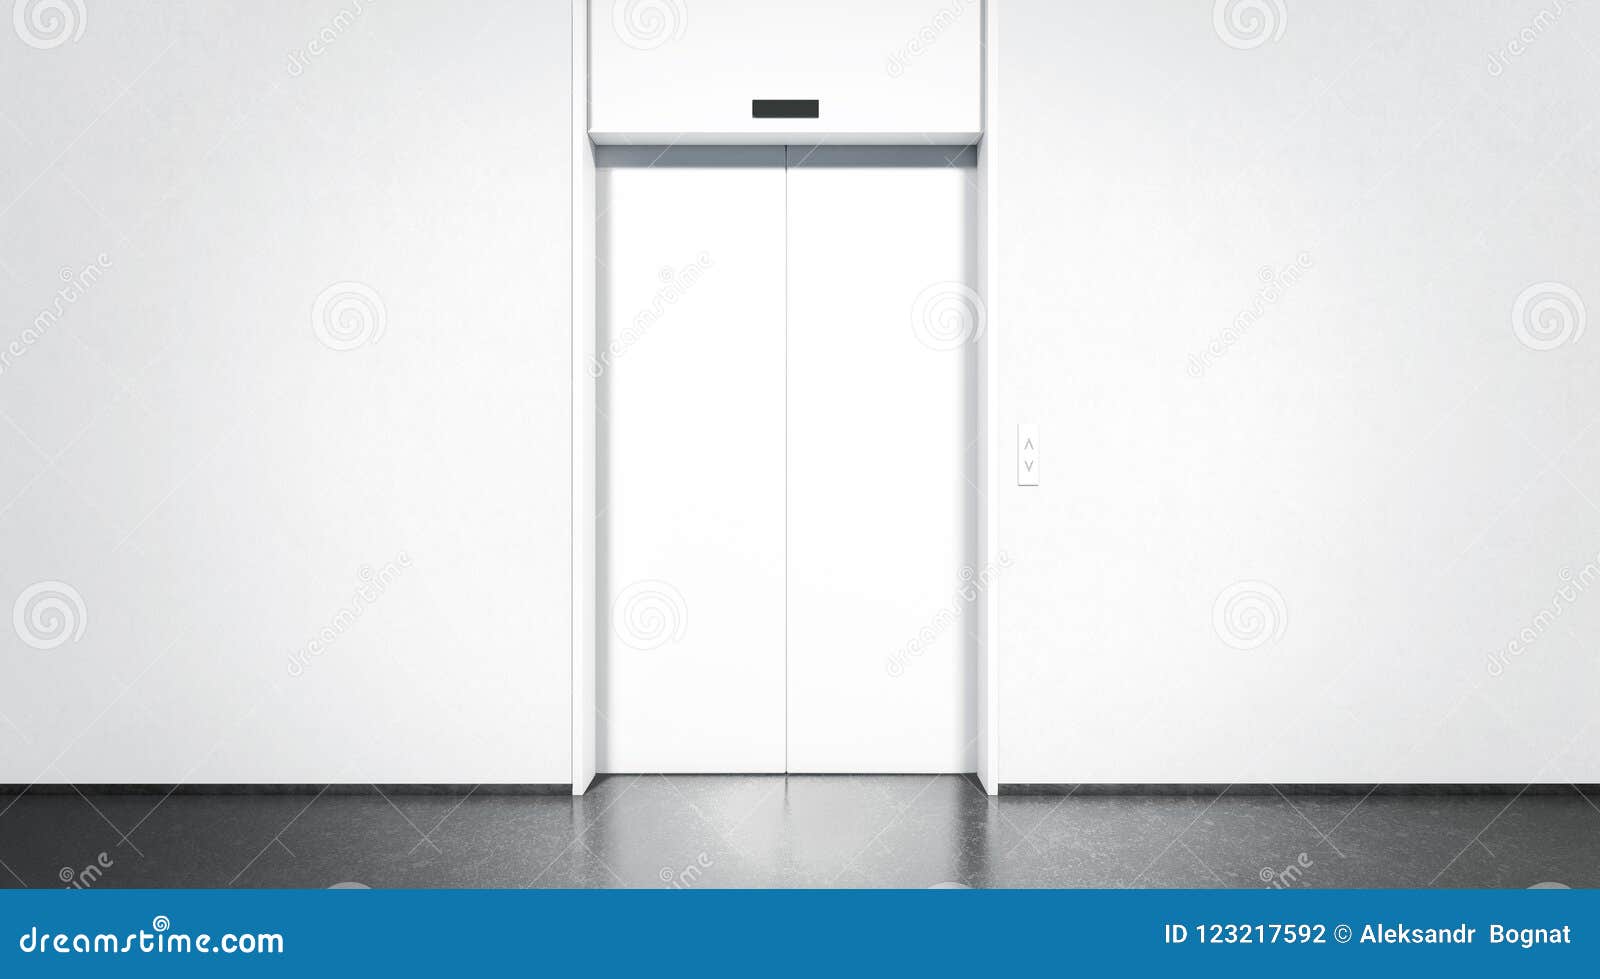 Download Blank Closed Elevator With Button Mock Up Front View Stock Photo Image Of Gate Corridor 123217592